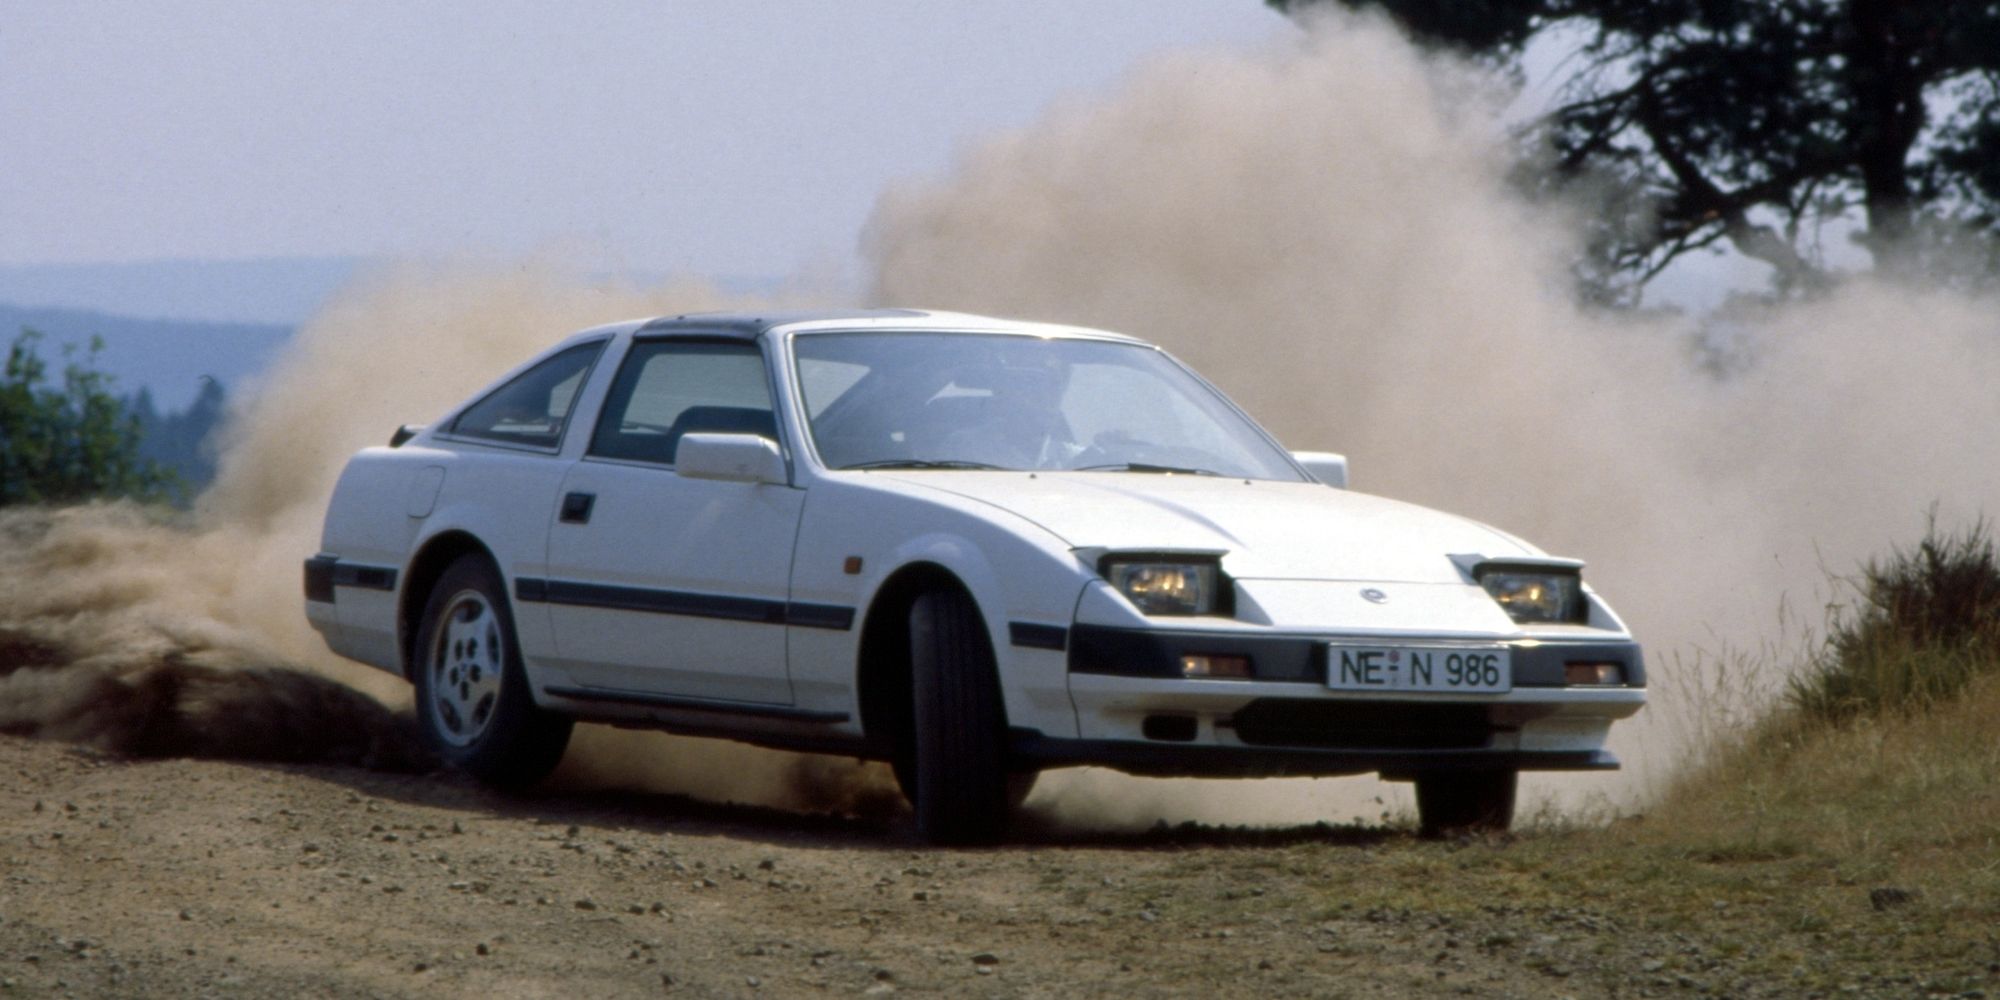 The Z31 drifting on the dirt